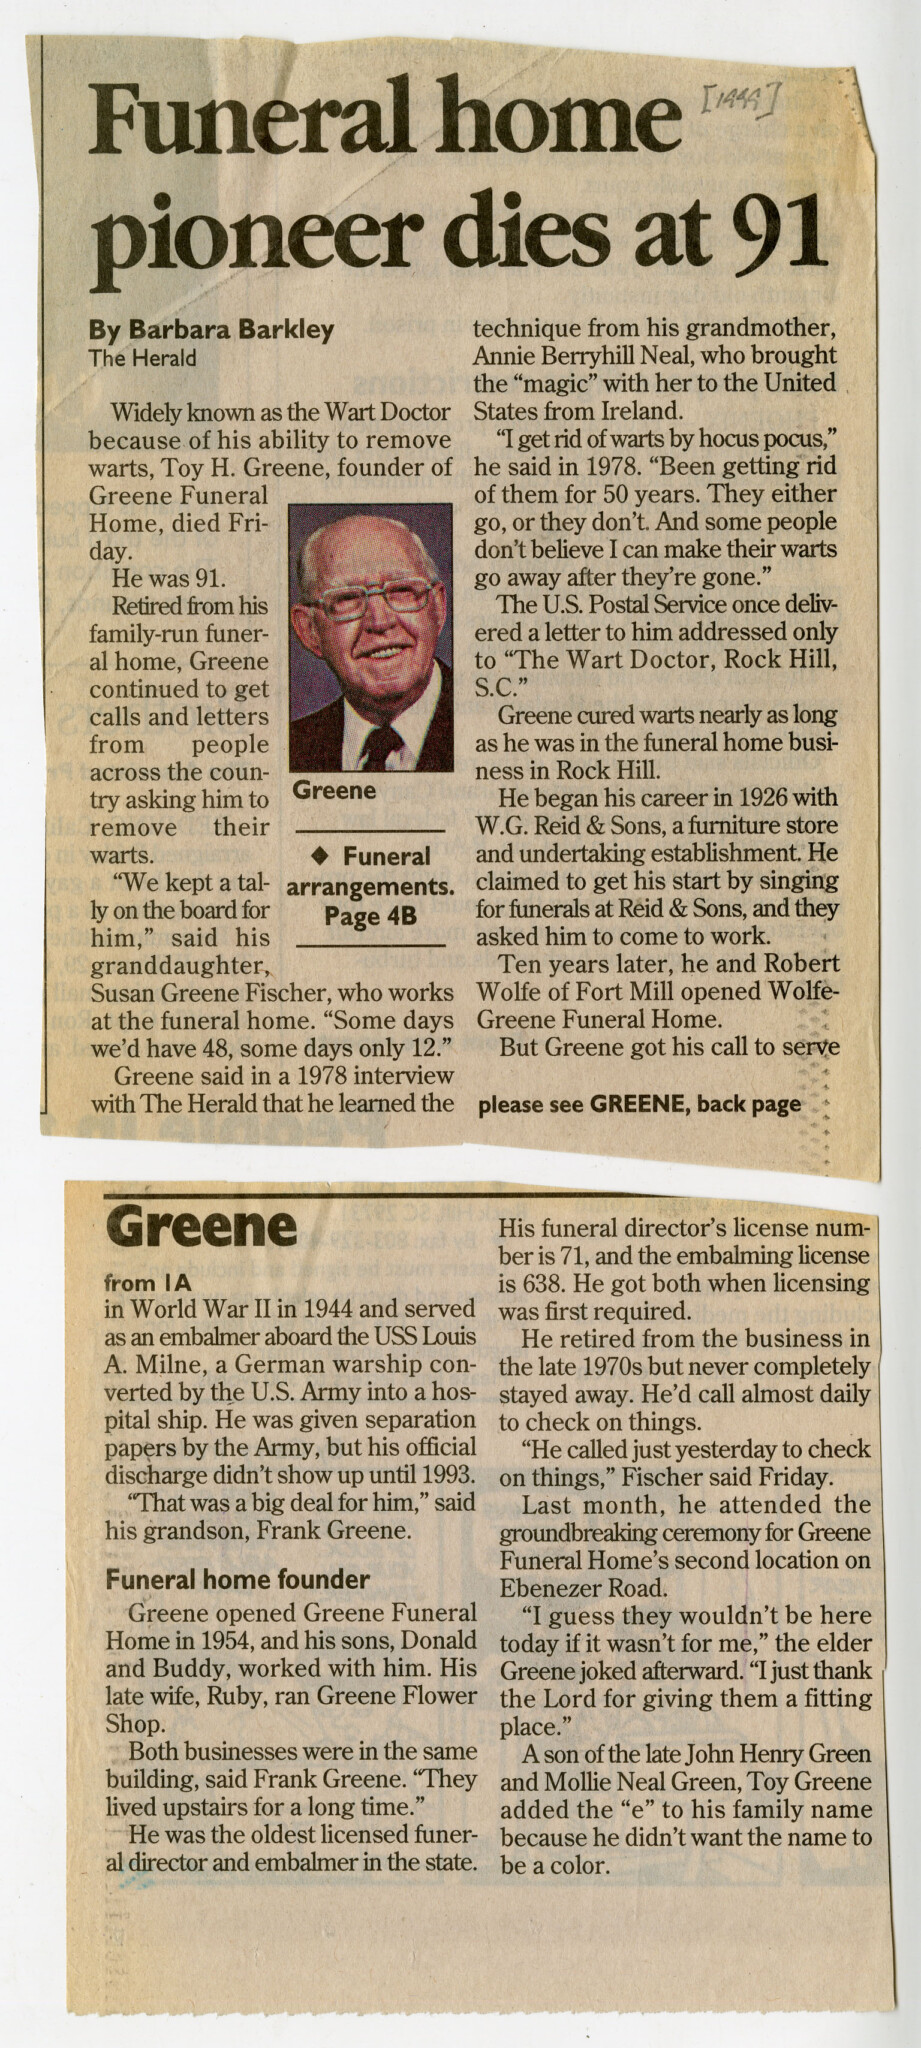 OBIT OF TOY H. GREENE - FOUNDER OF GREENE FUNERAL HOME